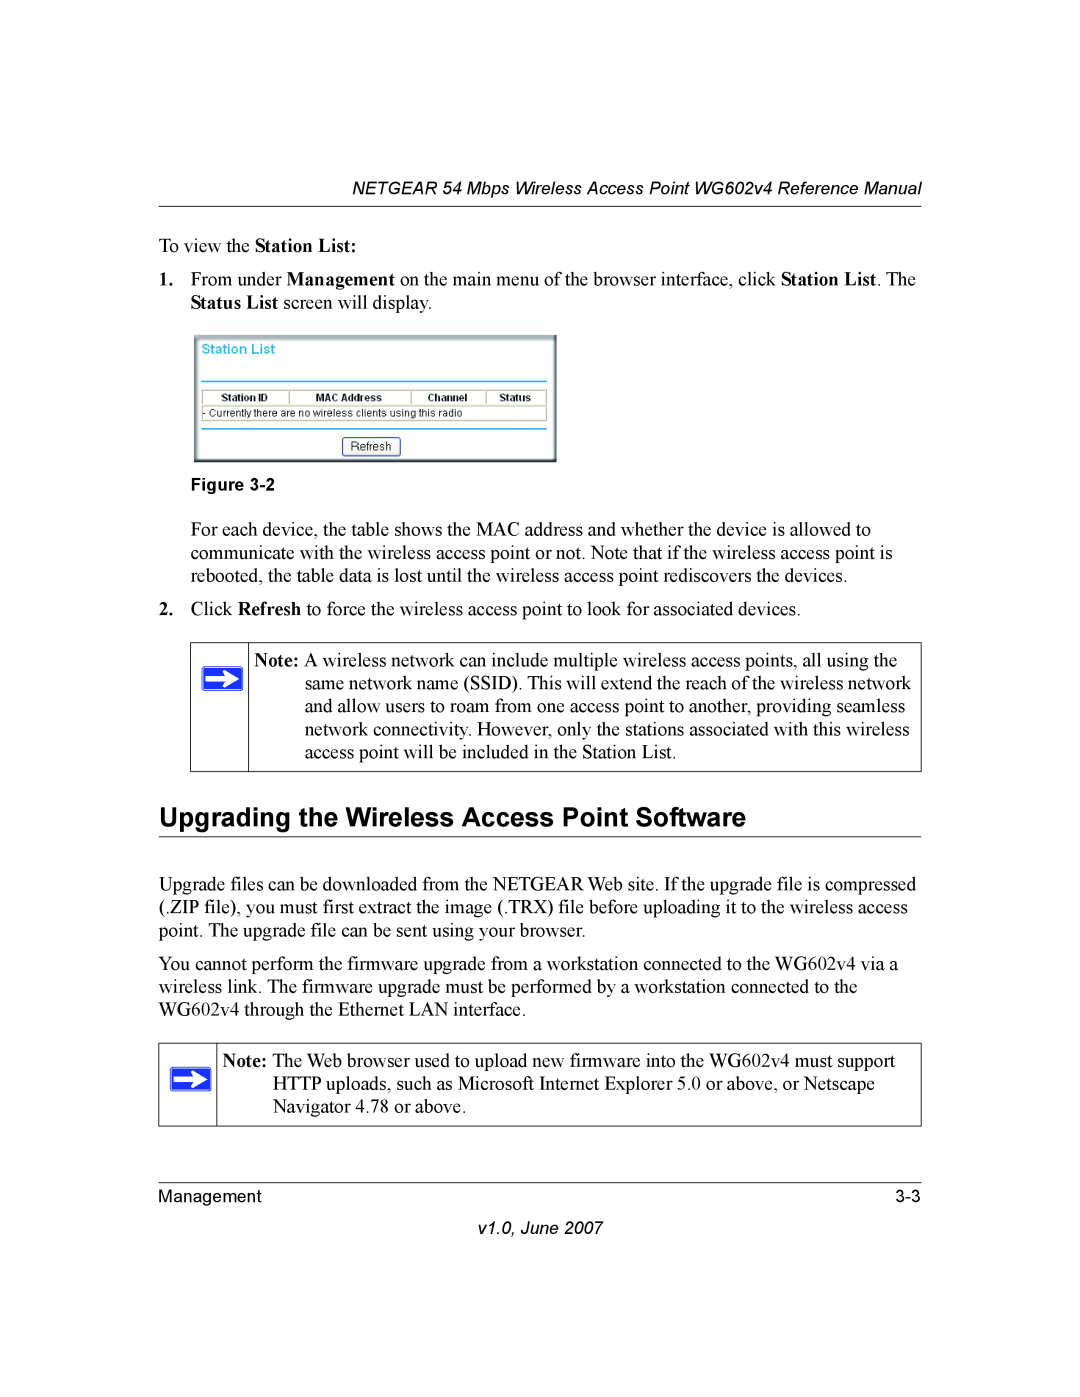 NETGEAR WG602V4 manual Upgrading the Wireless Access Point Software, To view the Station List 